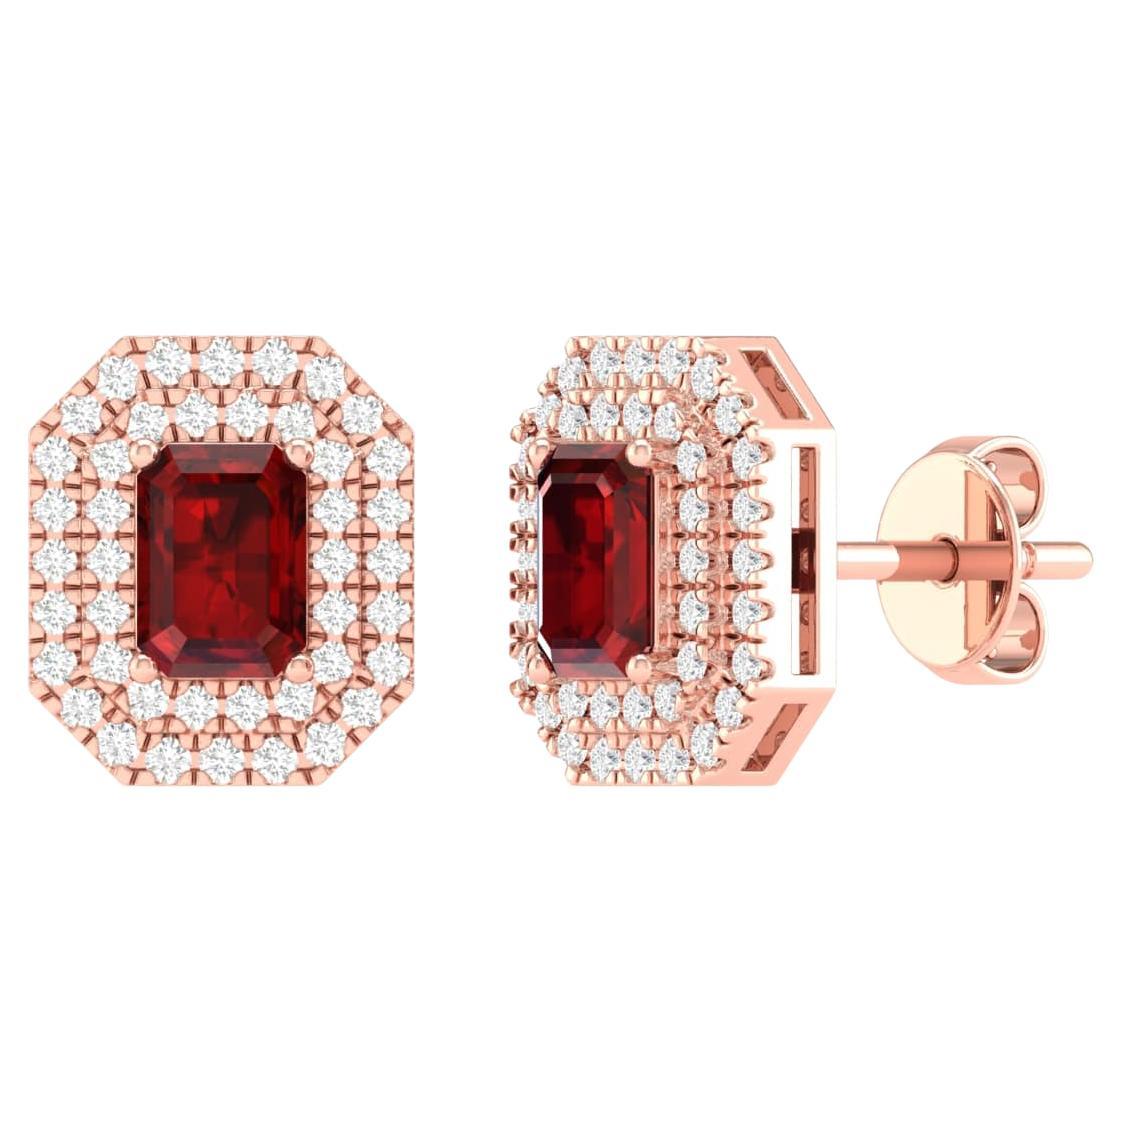 18 Karat Rose Gold 1.26 Carat Ruby Solitaire Stud Earrings For Sale